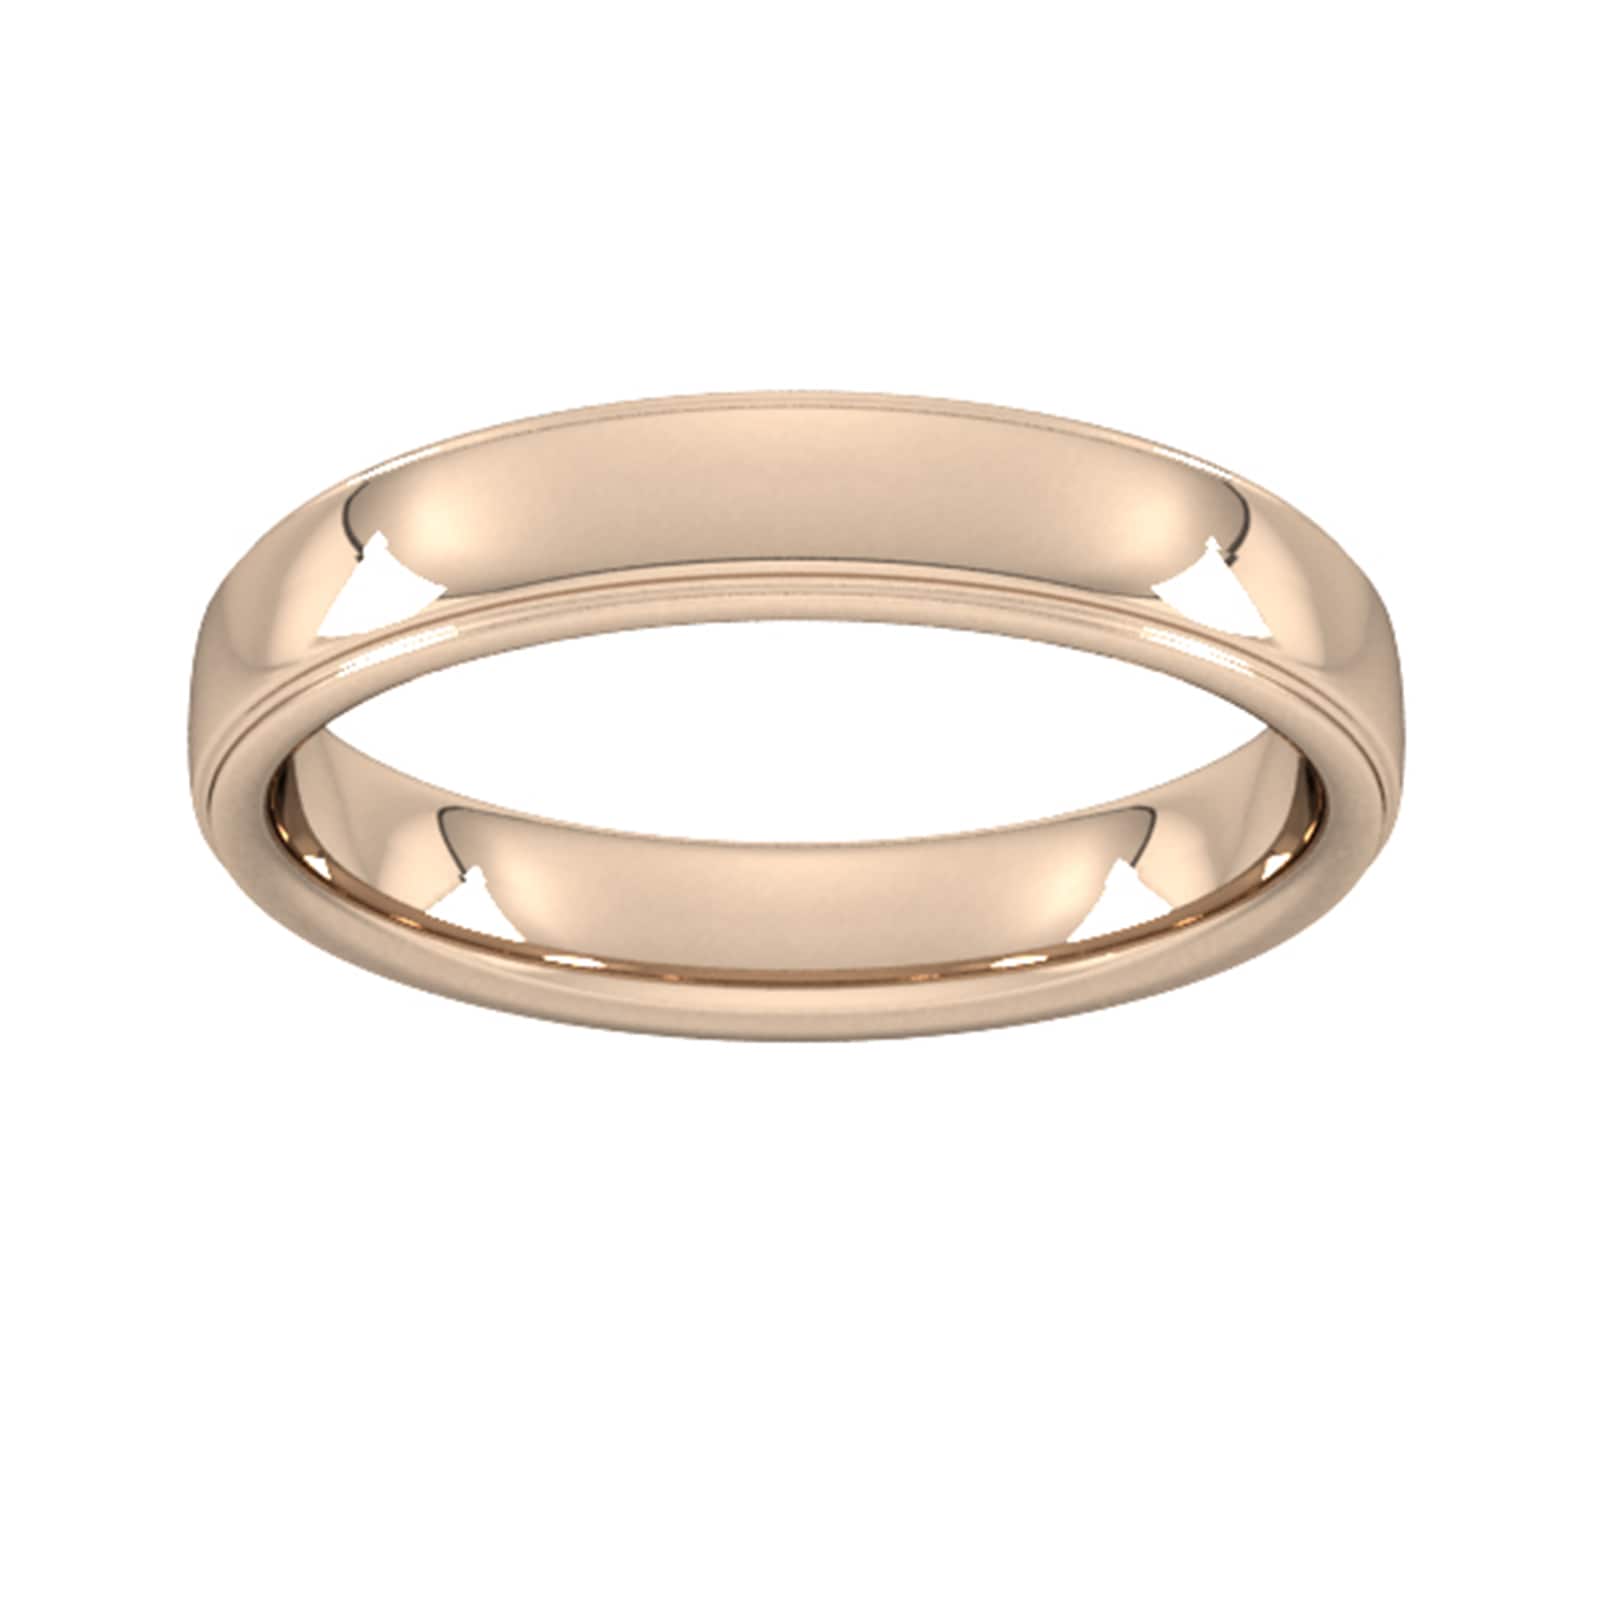 4mm Slight Court Heavy Polished Finish With Grooves Wedding Ring In 9 Carat Rose Gold - Ring Size H